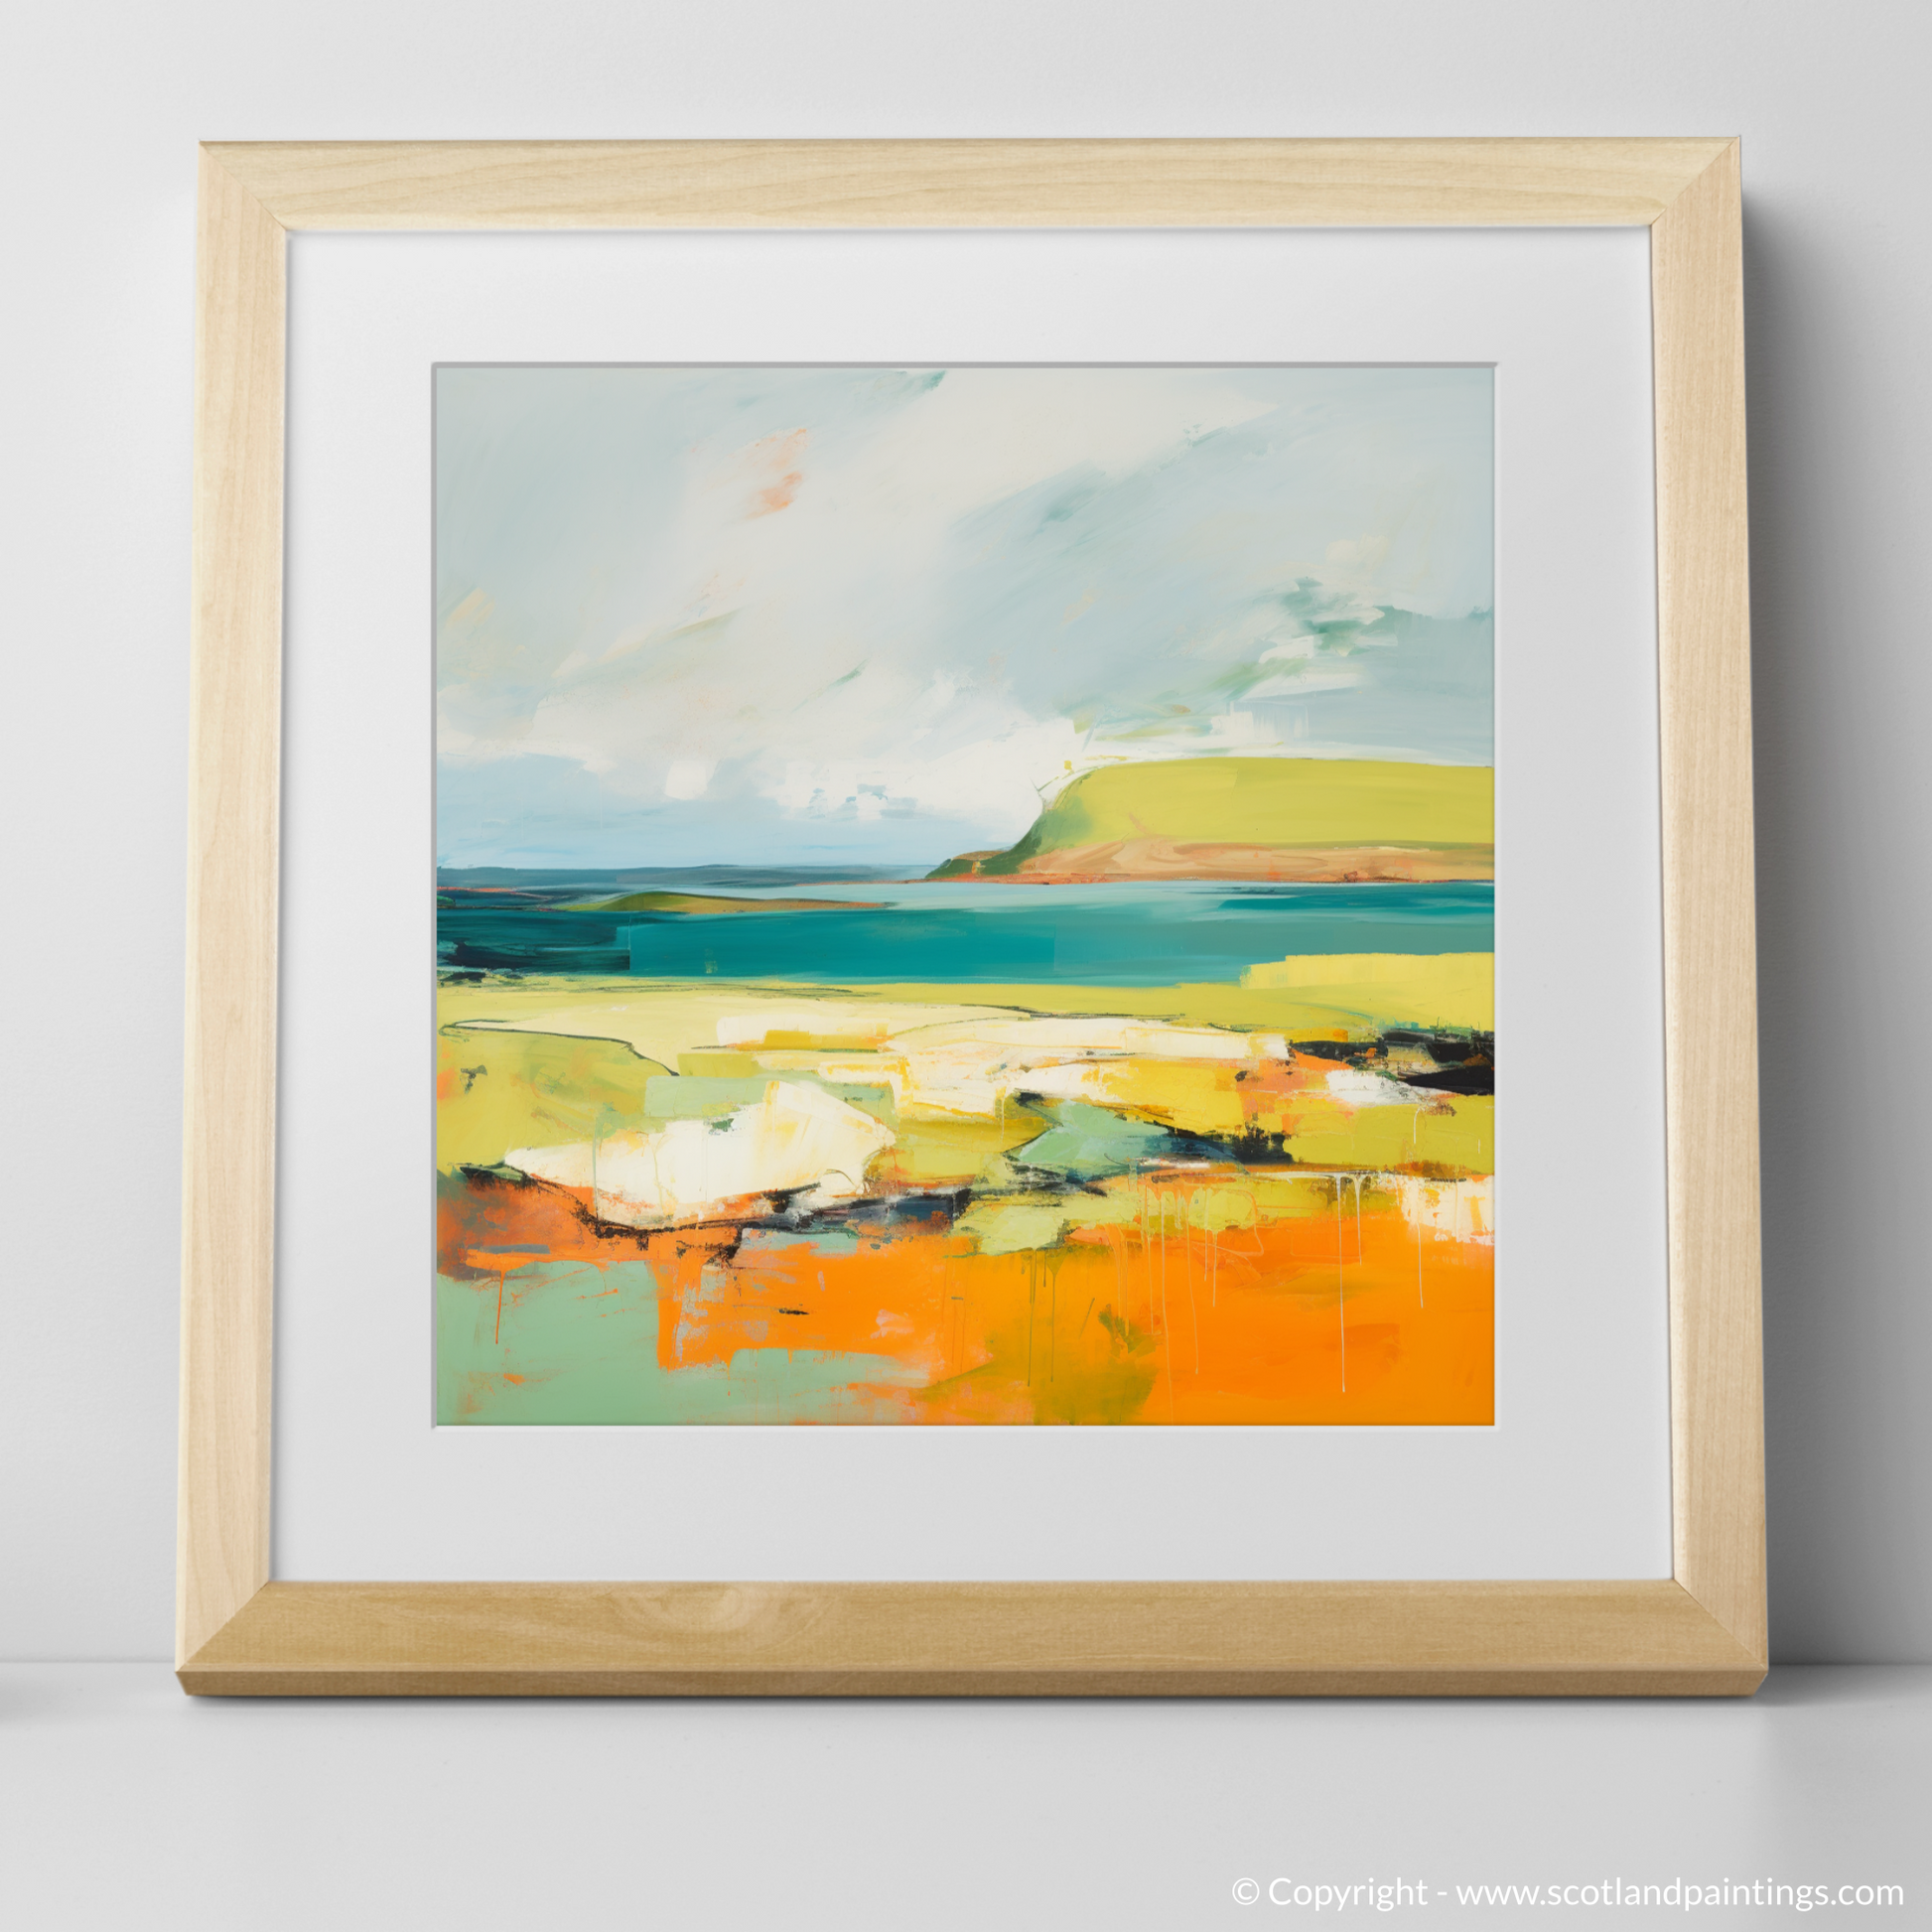 Art Print of Orkney, North of mainland Scotland in summer with a natural frame